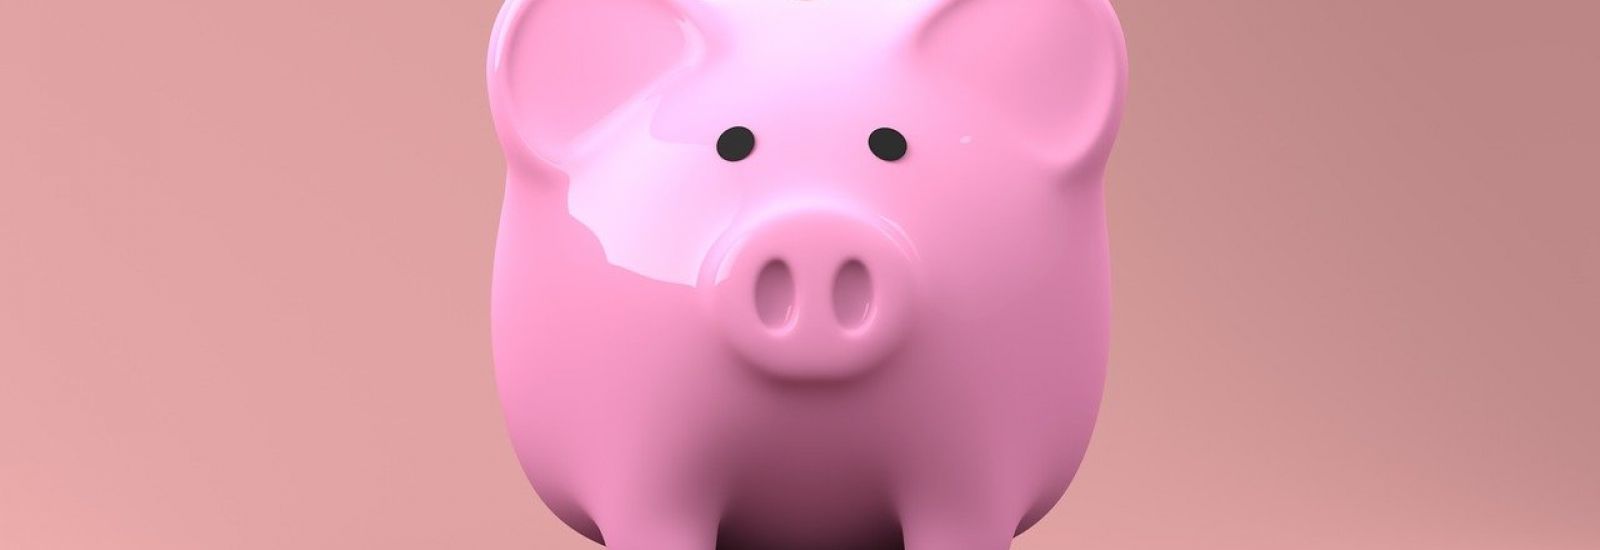 Picture of a pink piggy bank against pink background. 